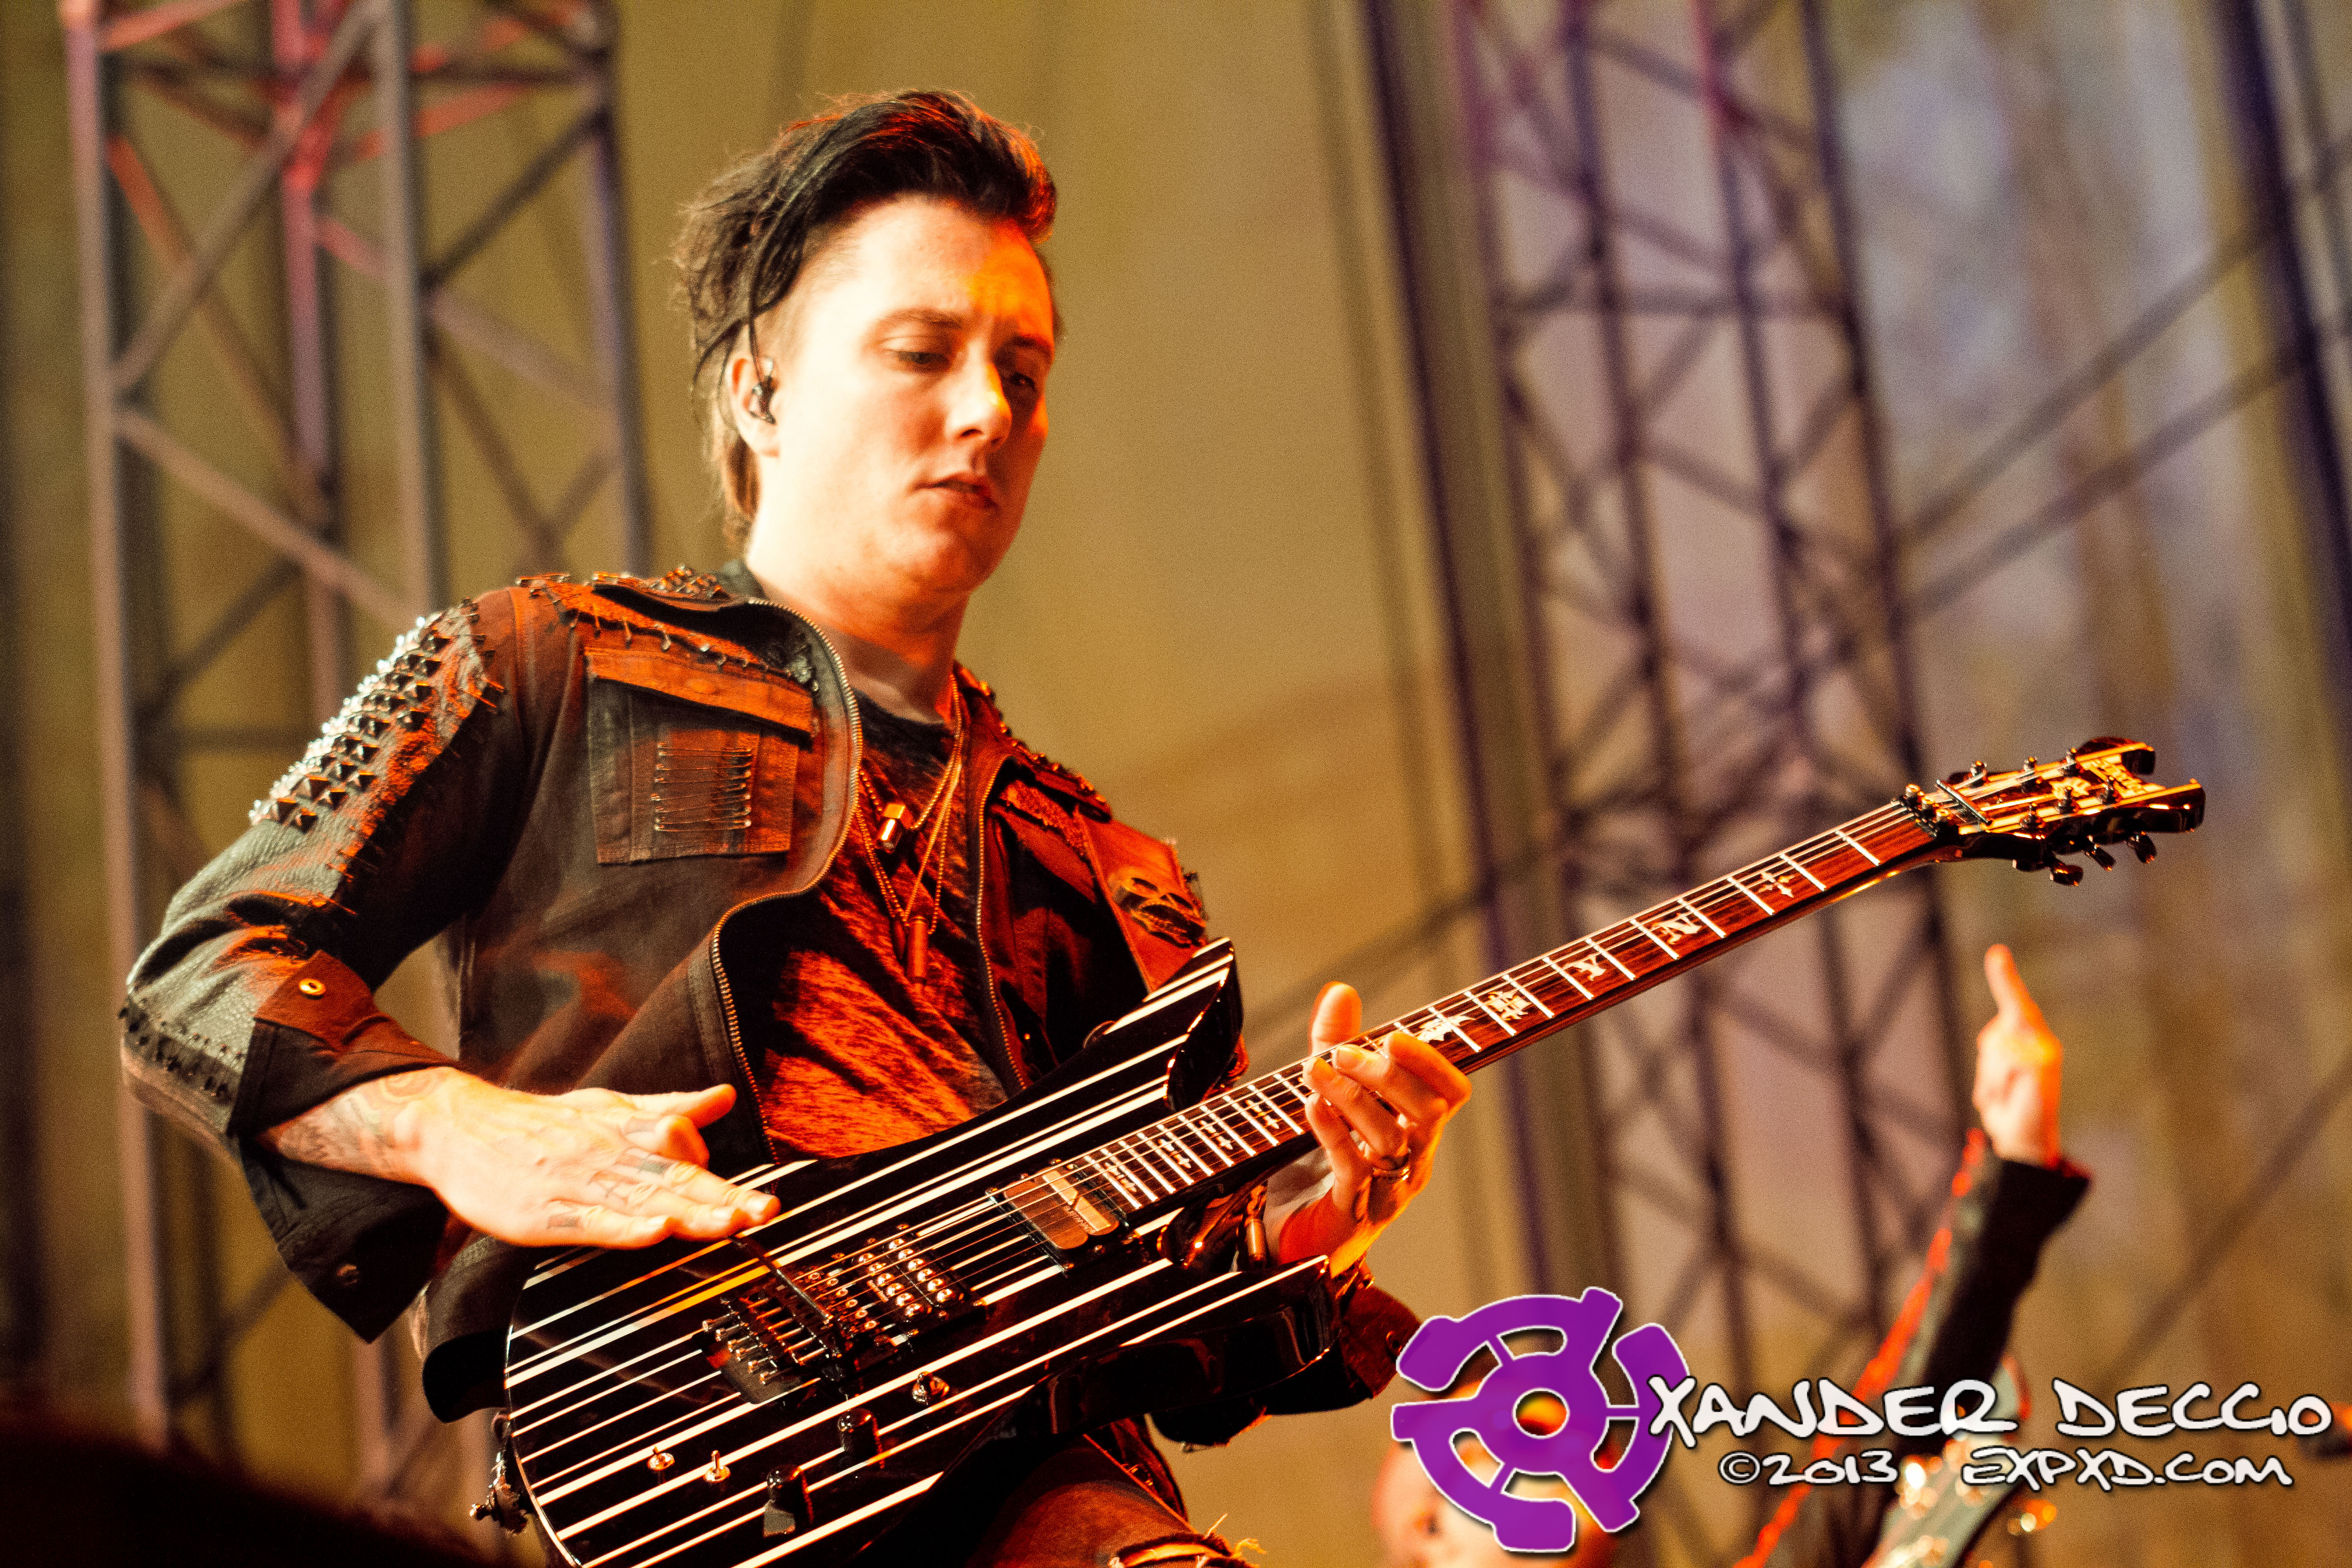 Pain In The Grass 2013: Avenged Sevenfold (Photo by Xander Deccio)